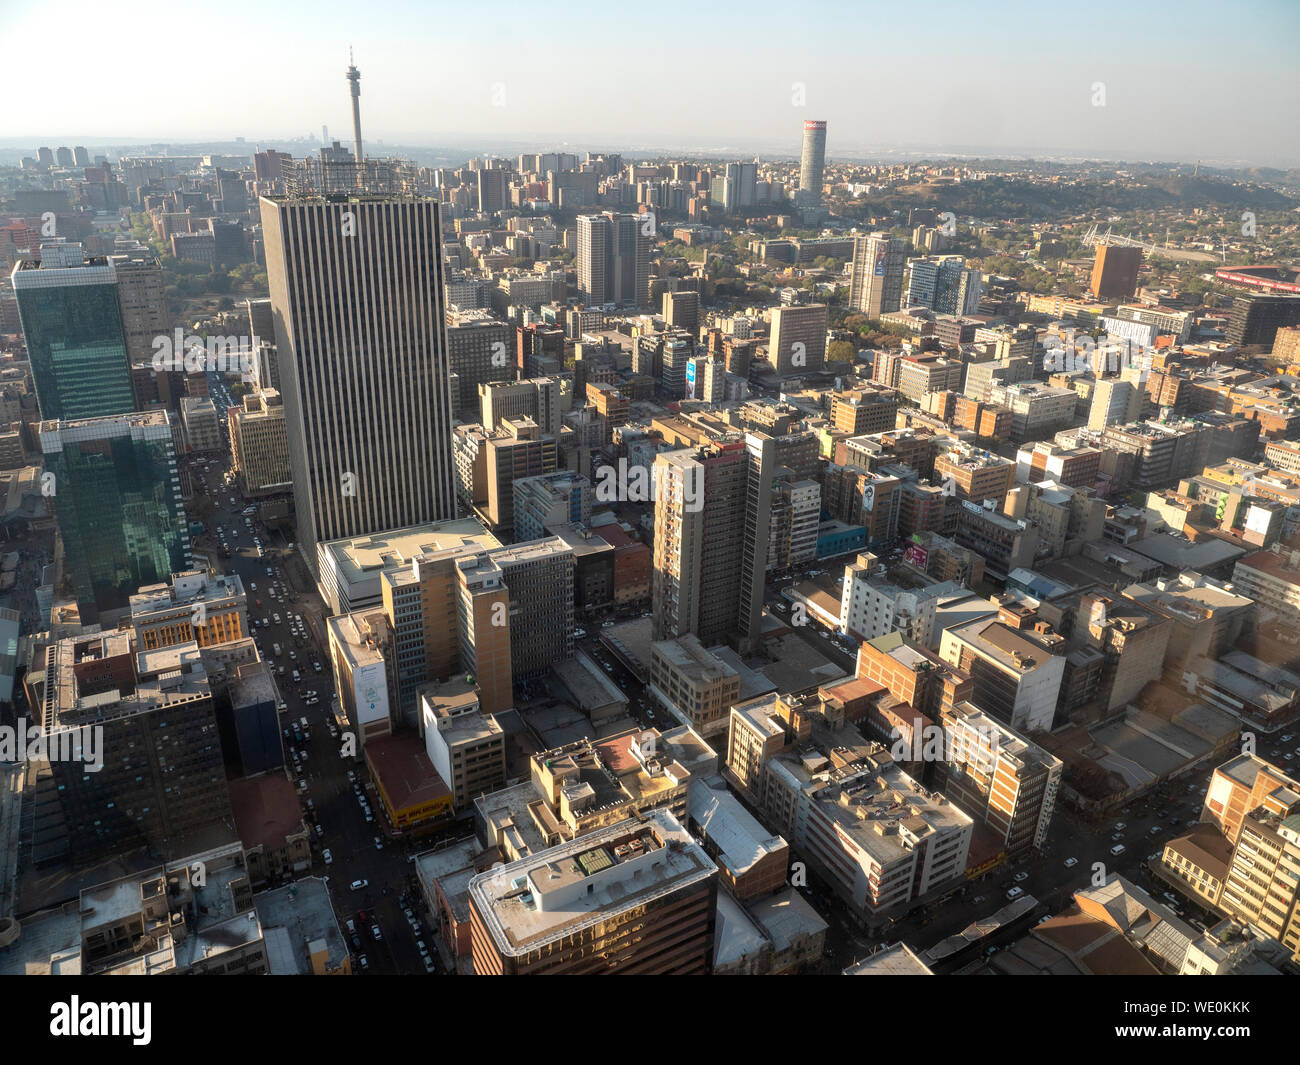 High angle view over Johannesburg city center, South Africa Stock Photo